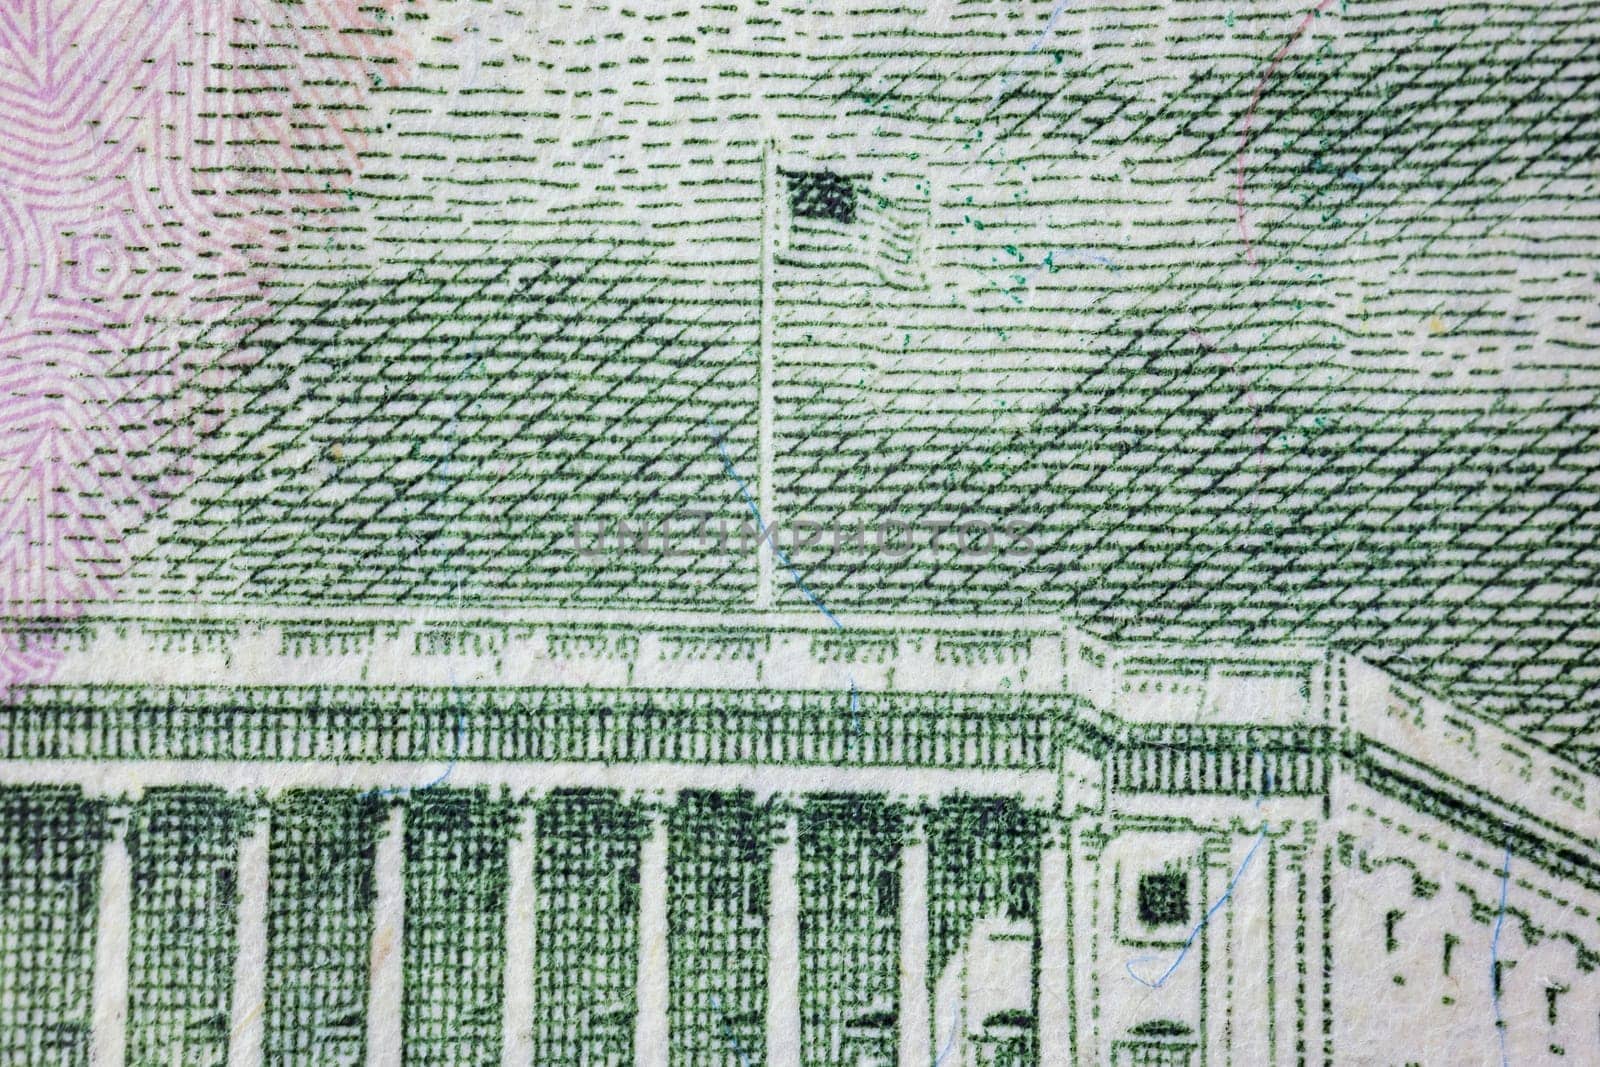 Capitol close-up on a fifty dollar bill by zokov